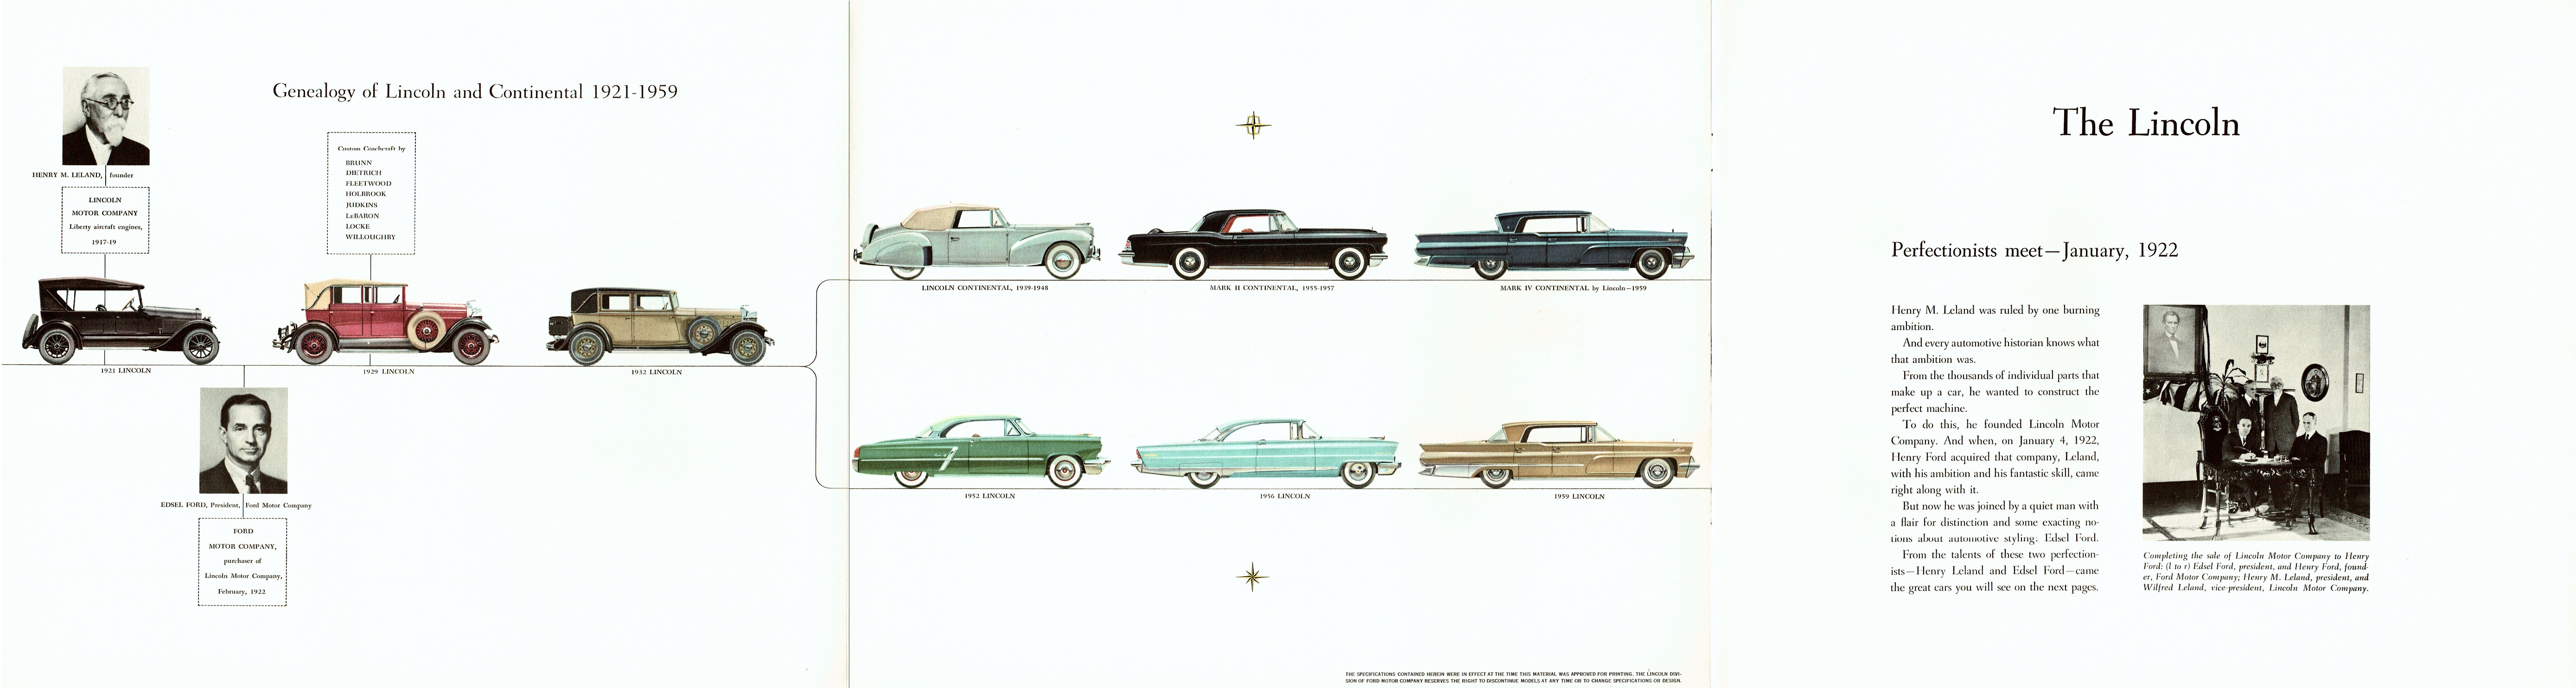 1959_Lincoln_Mailer-03-04-05